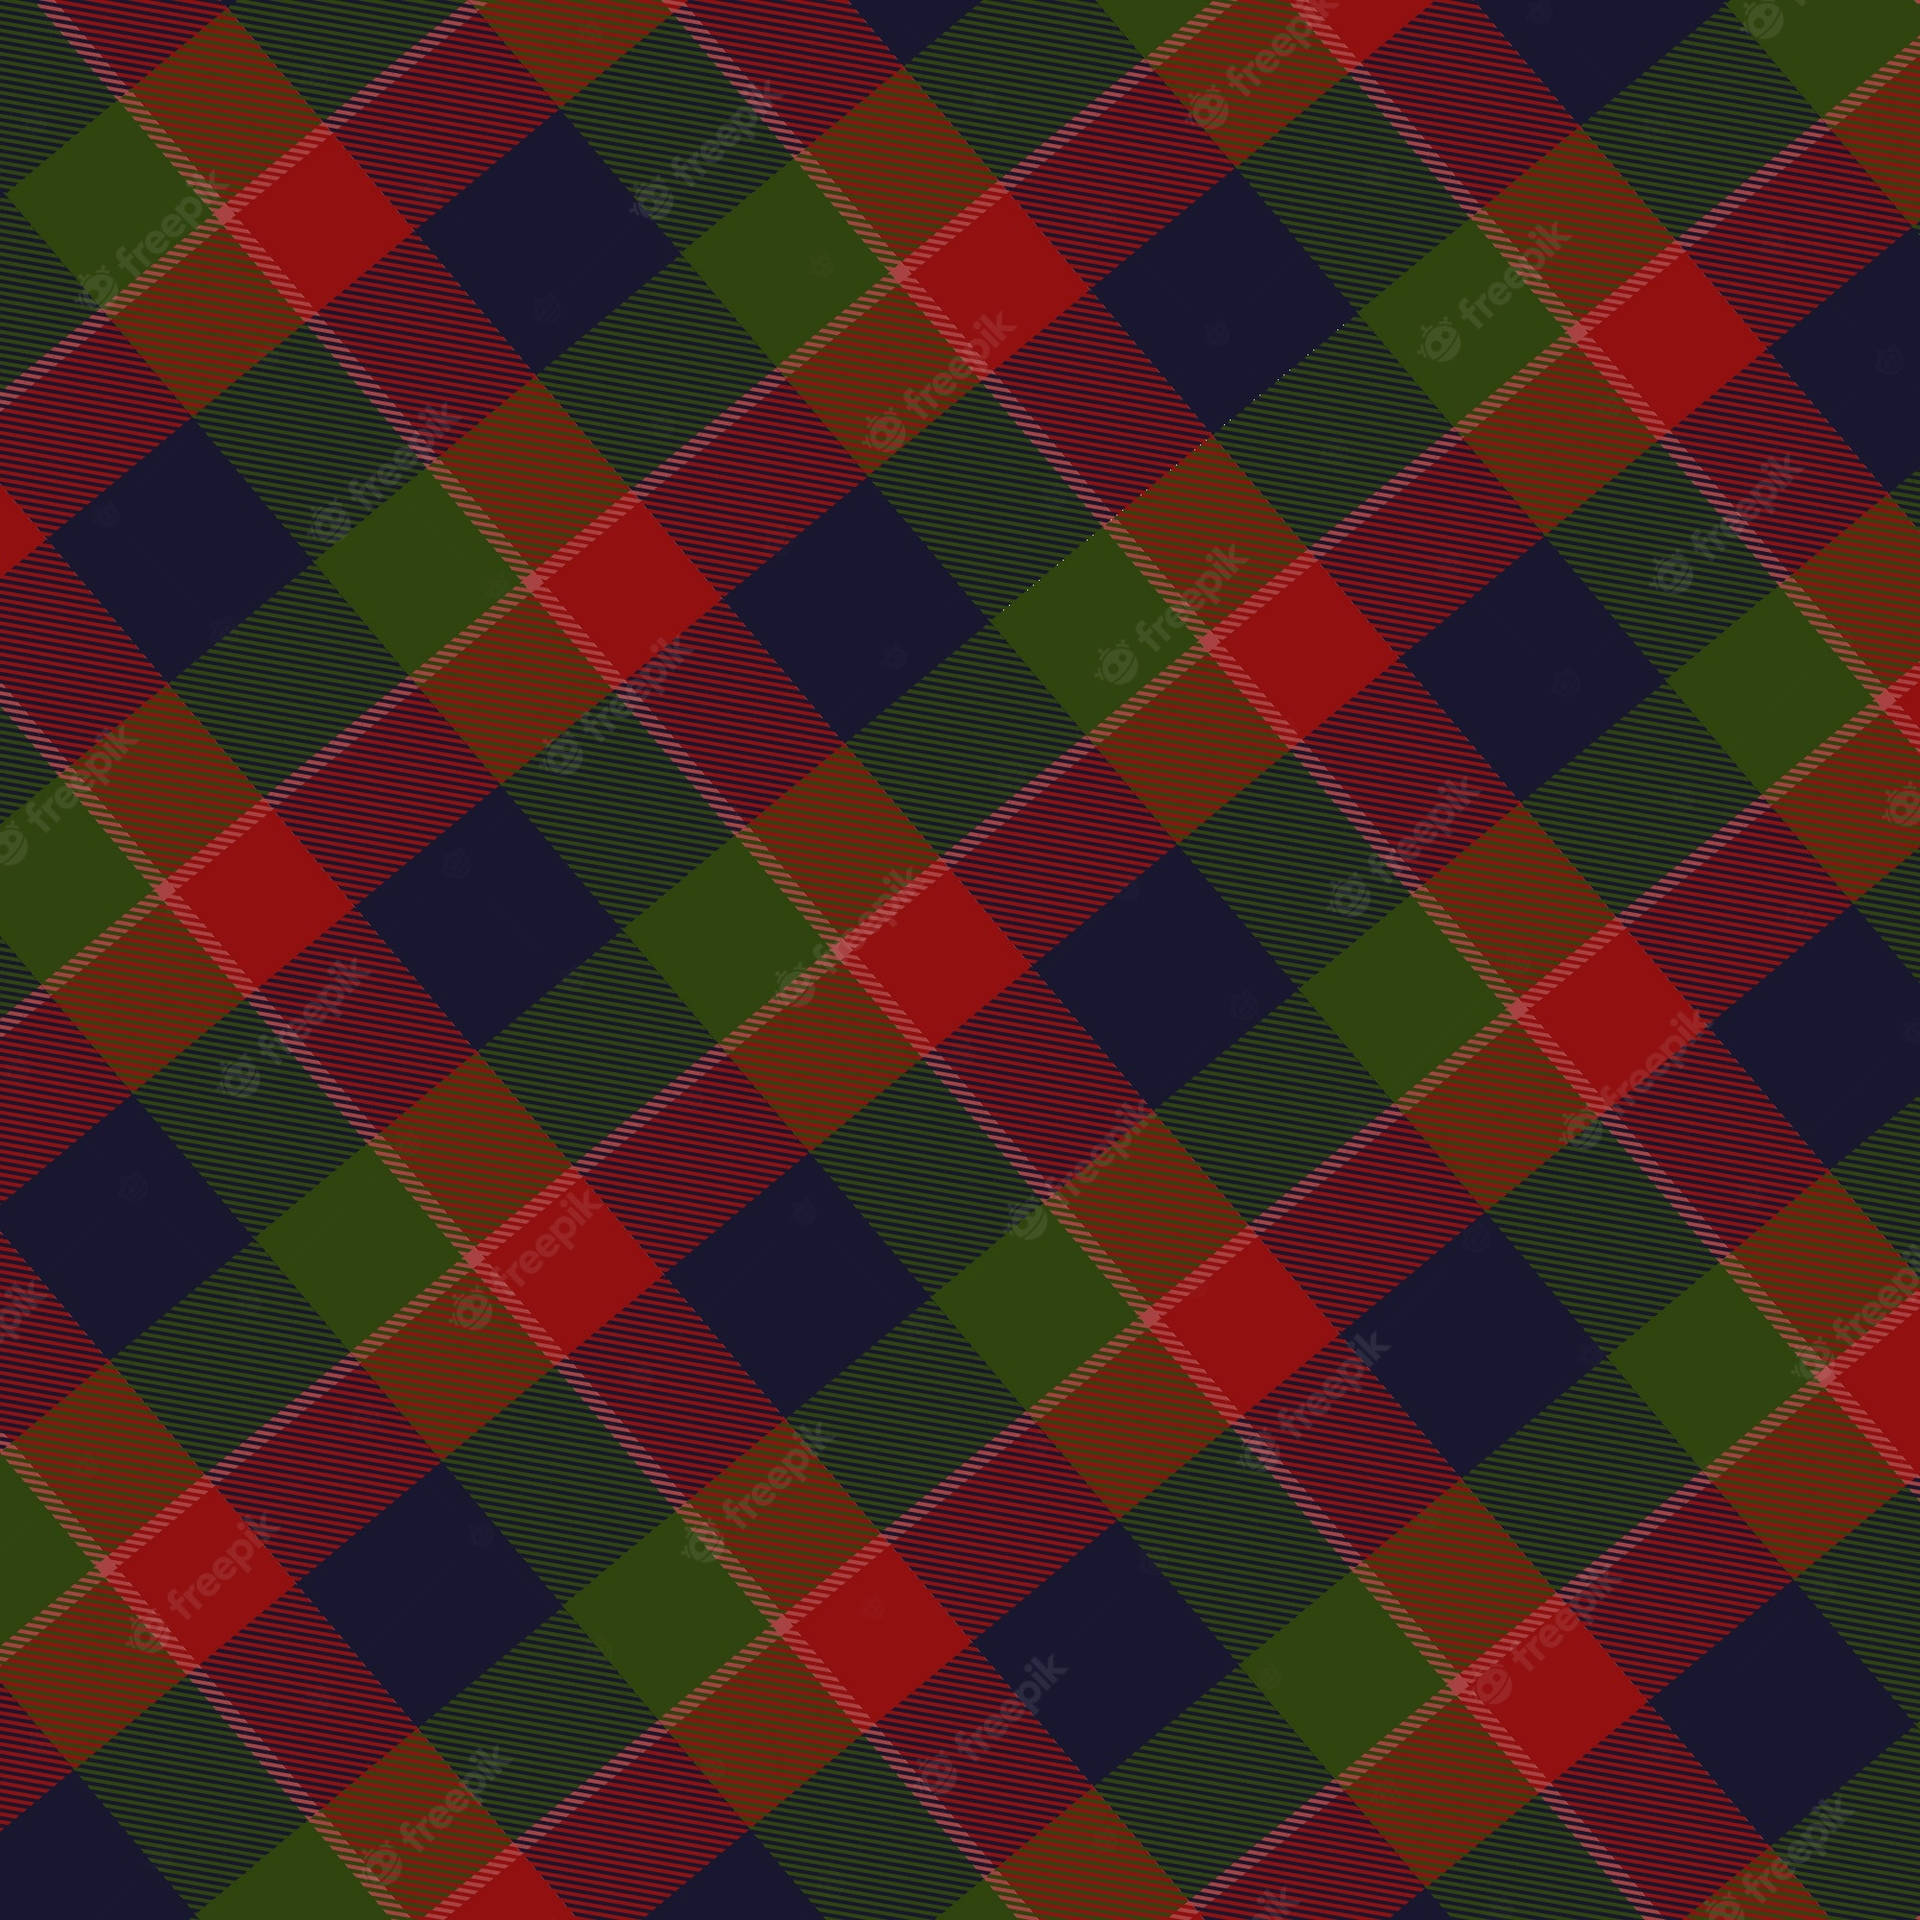 A Plethora Of Variously Patterned Plaid Cloth Pieces. Wallpaper